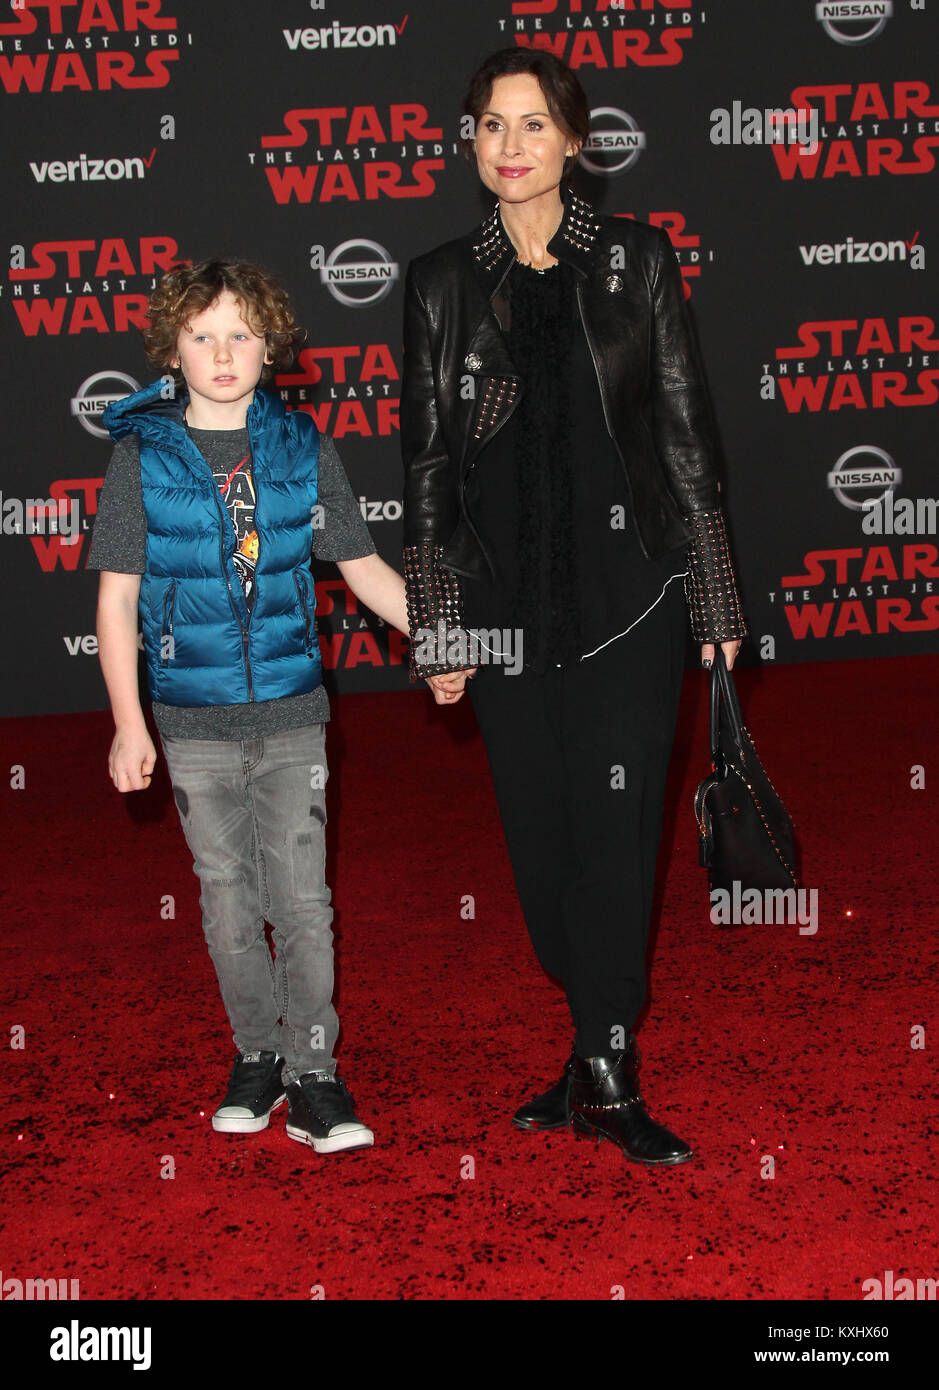 “Star Wars: The Last Jedi” Premiere held at the Shrine Auditorium in Los Angeles, California.  Featuring: Minnie Driver, son Henry Story Driver Where: Los Angeles, California, United States When: 09 Dec 2017 Credit: Adriana M. Barraza/WENN.com Stock Photo